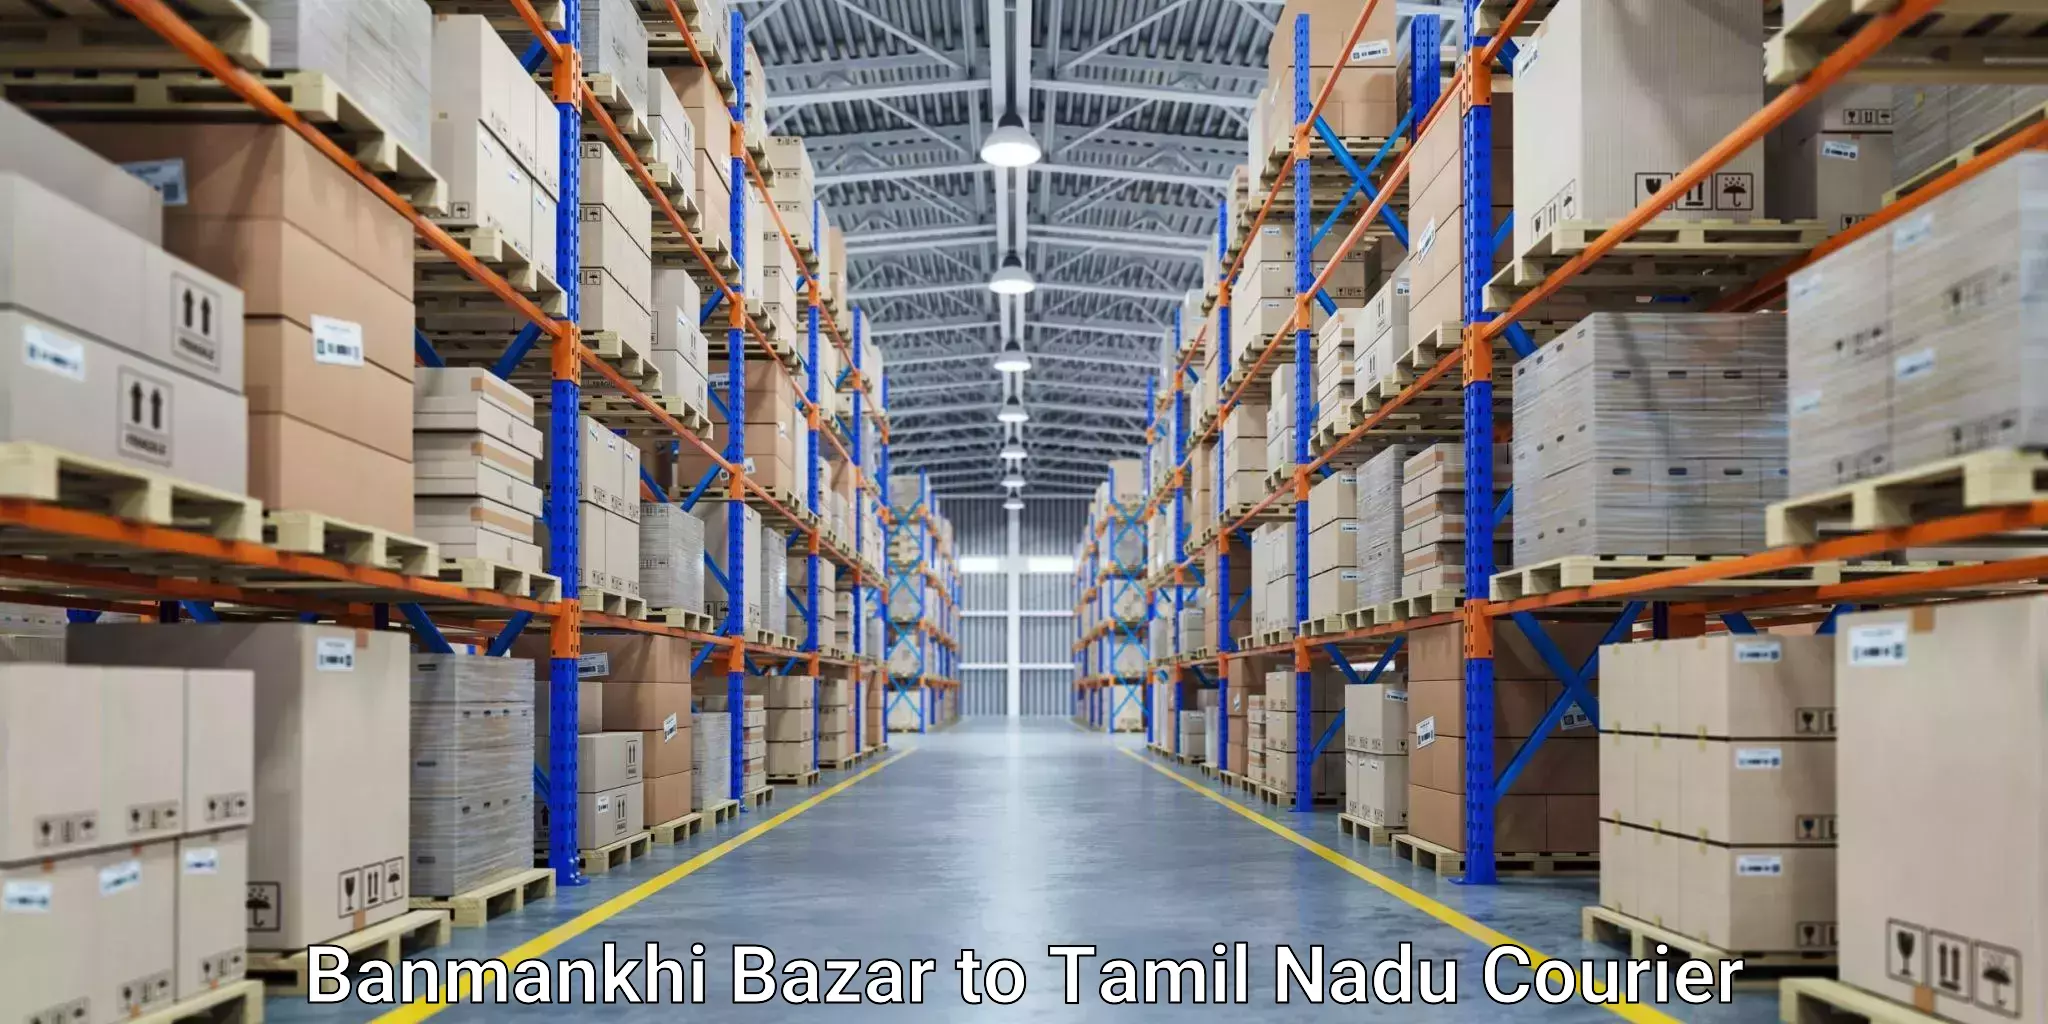 Round-the-clock parcel delivery Banmankhi Bazar to Thisayanvilai